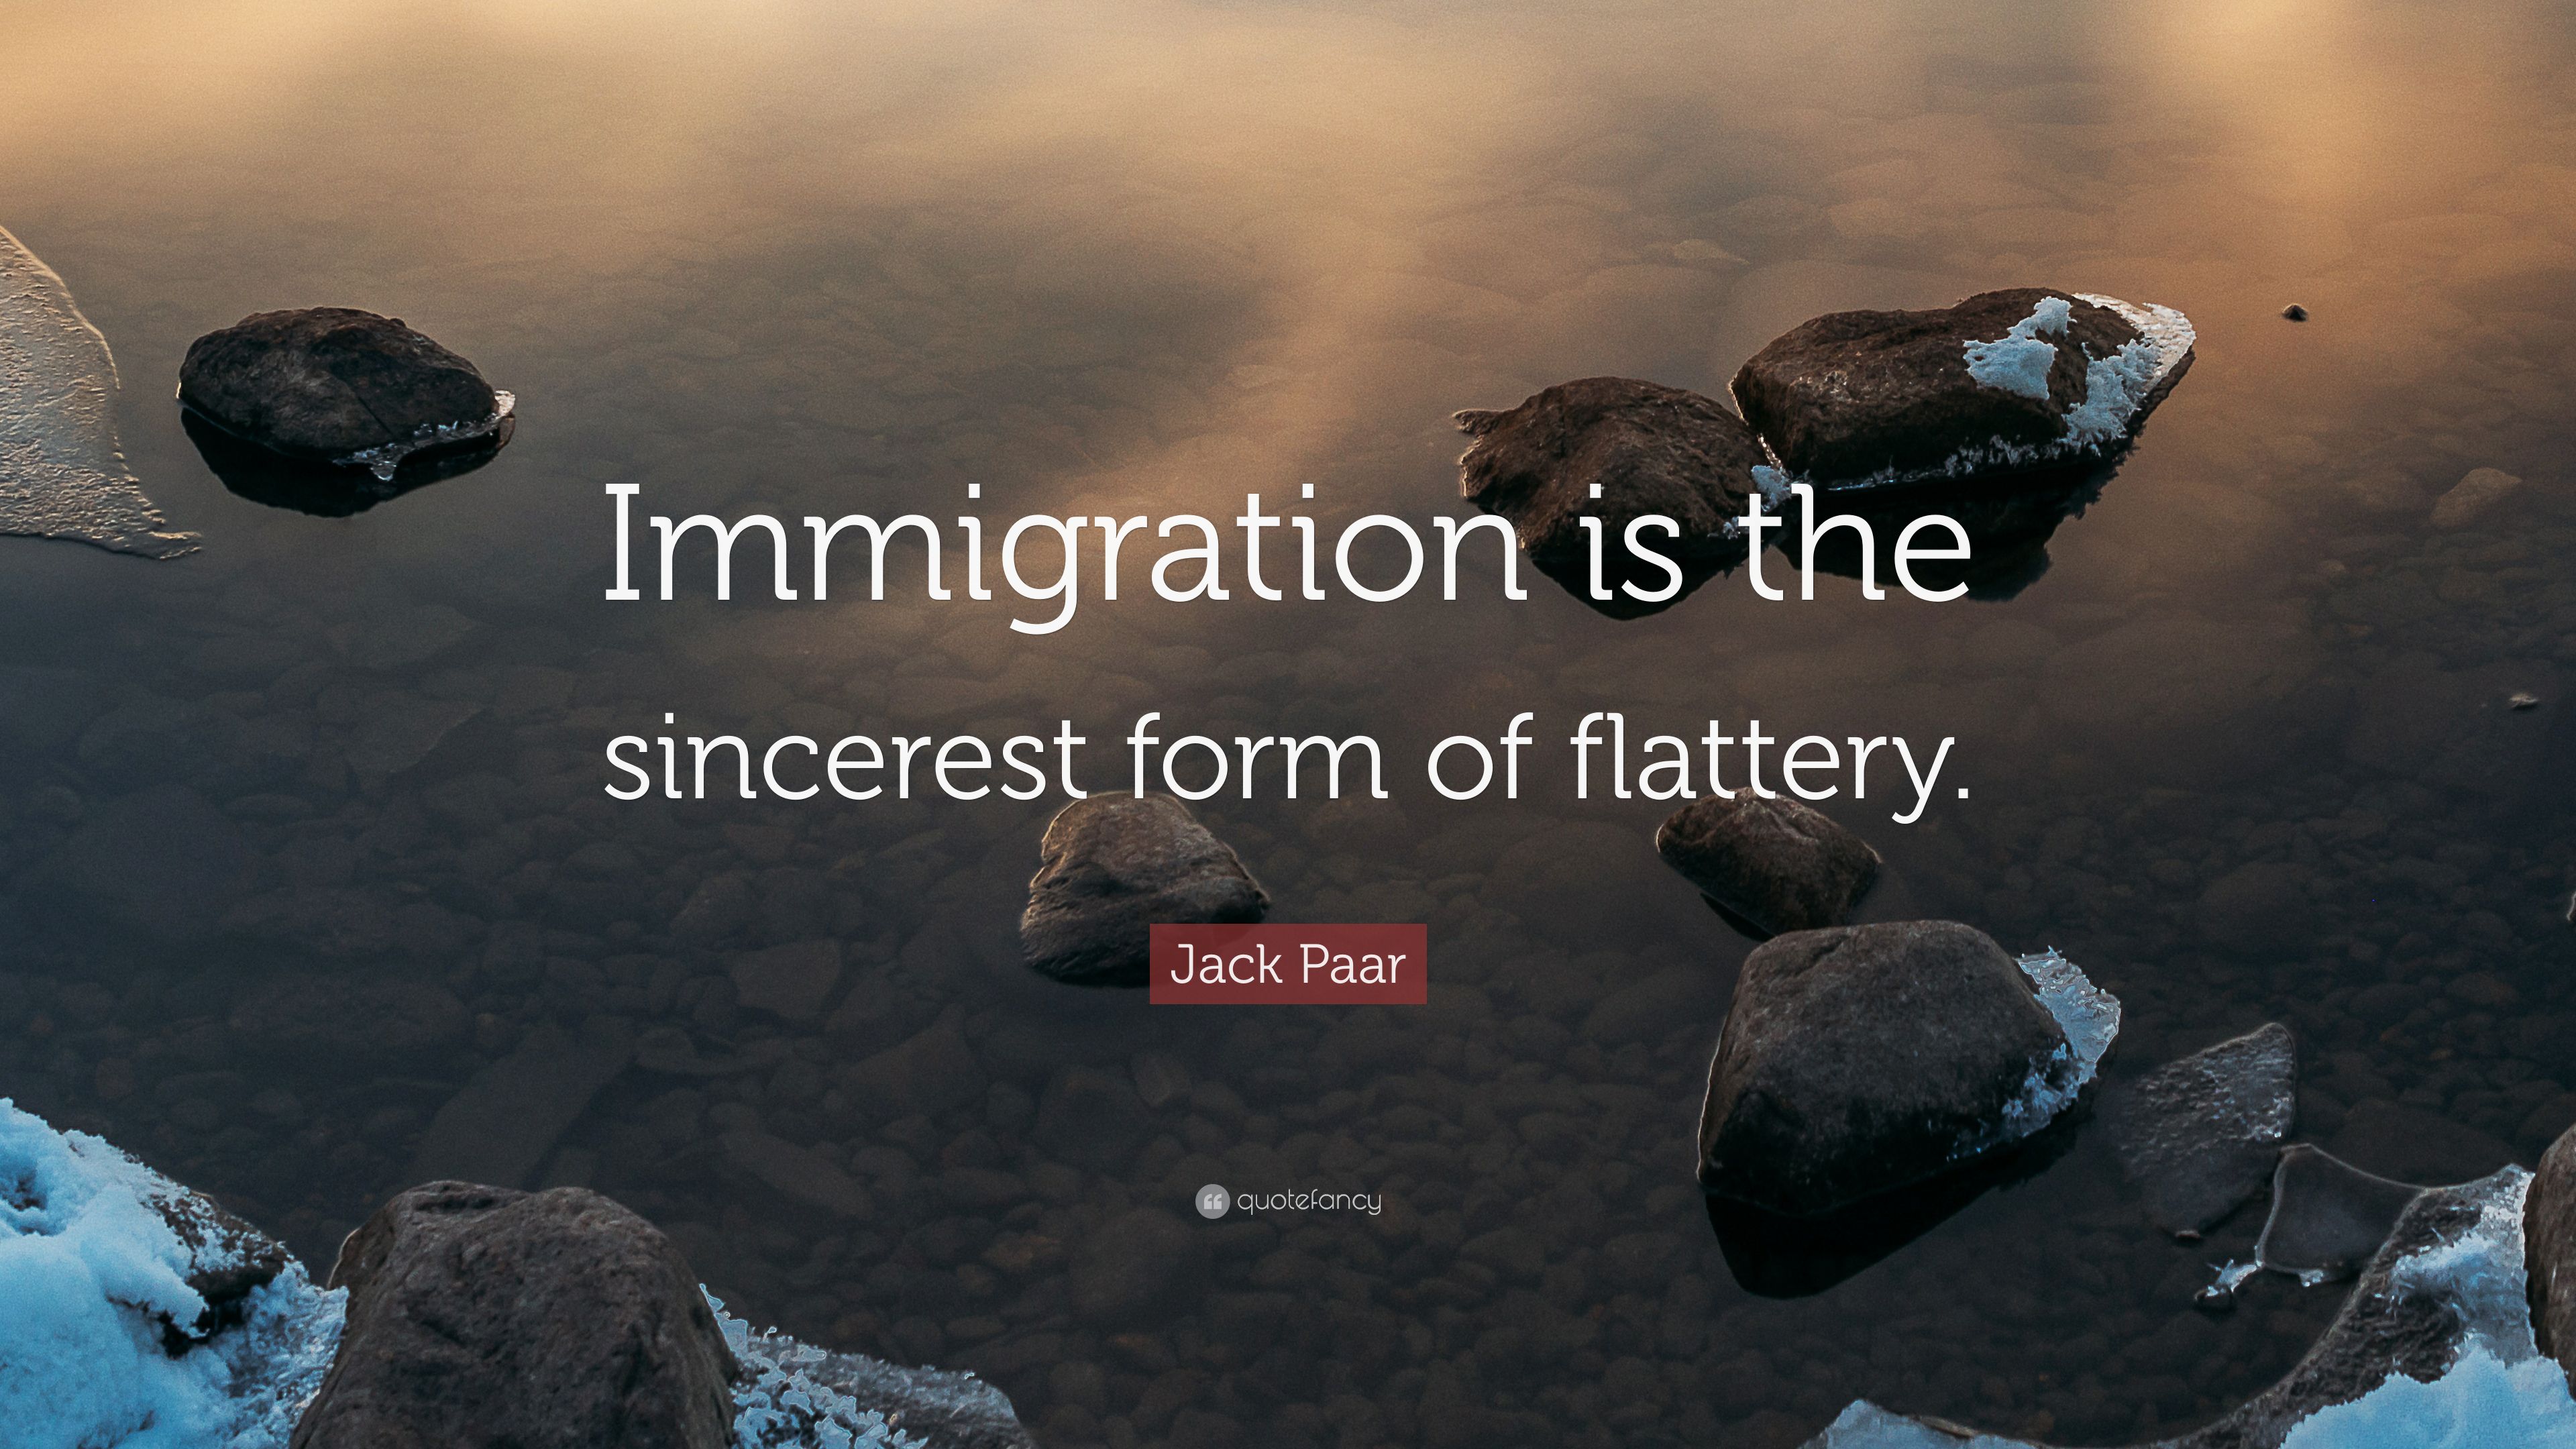 Jack Paar Quote: “Immigration is the sincerest form of flattery.” (7 wallpaper)